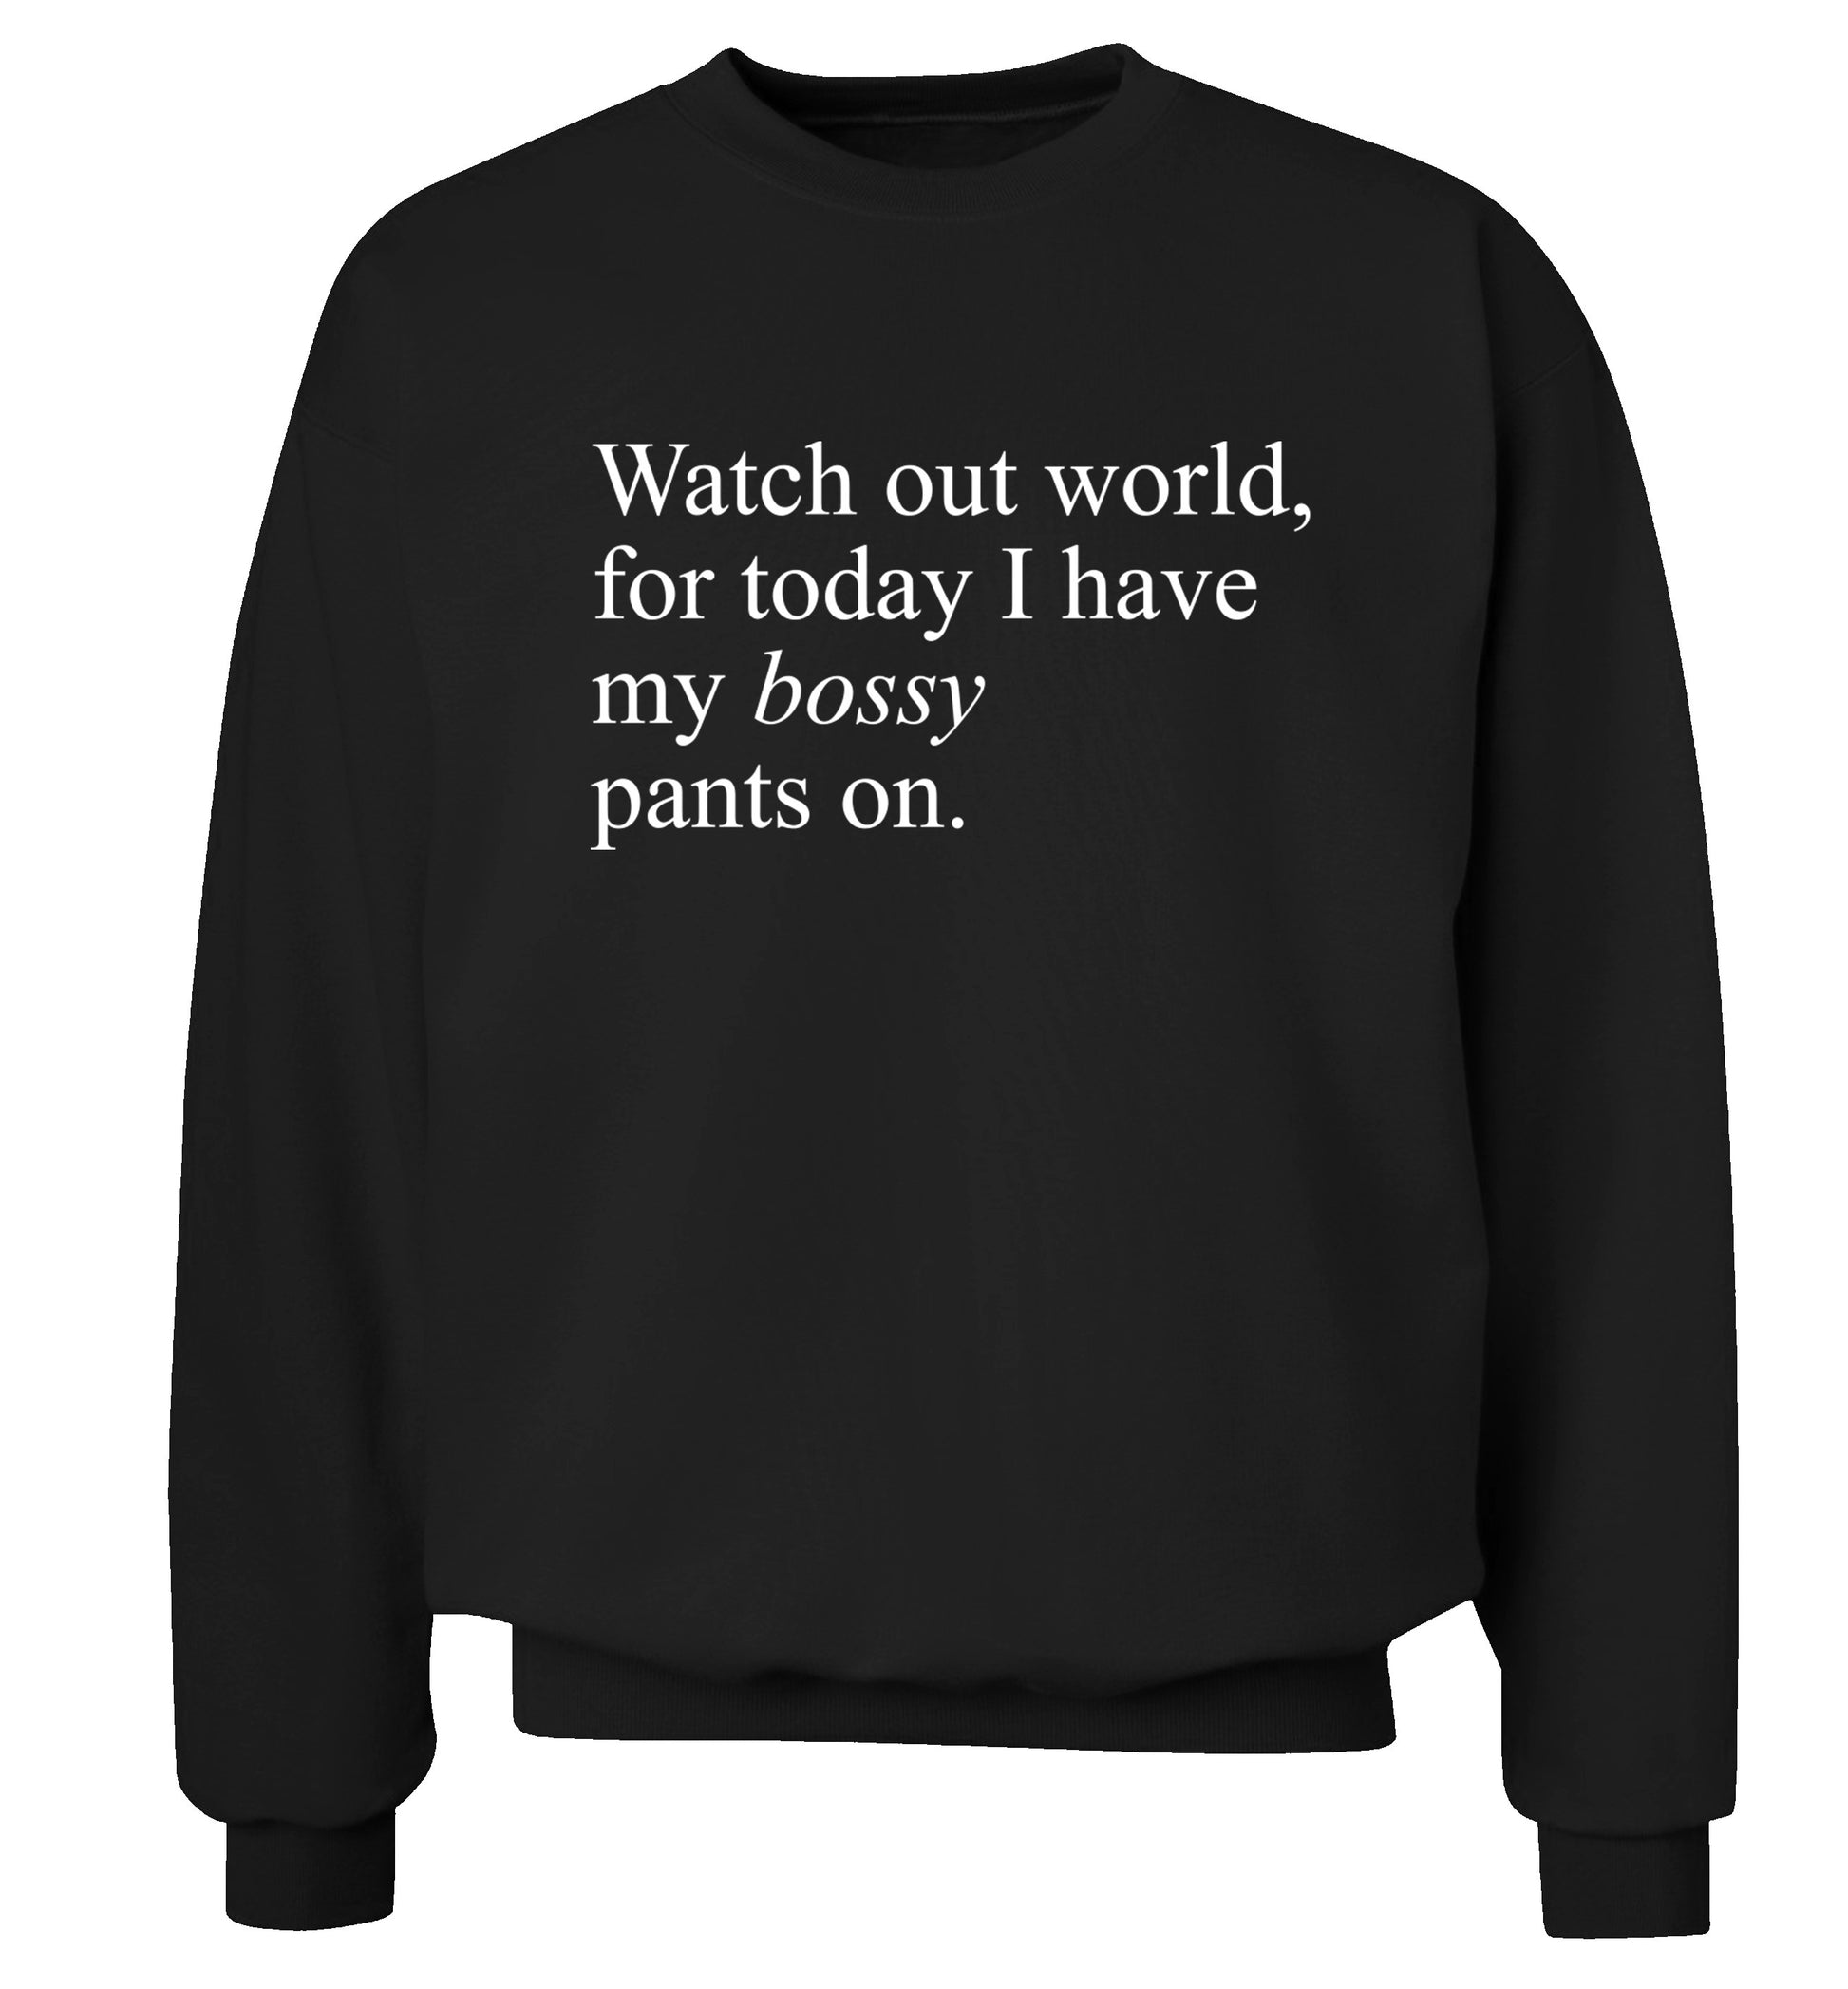 Watch out world, for today I have my bossy pants on Adult's unisex black Sweater 2XL